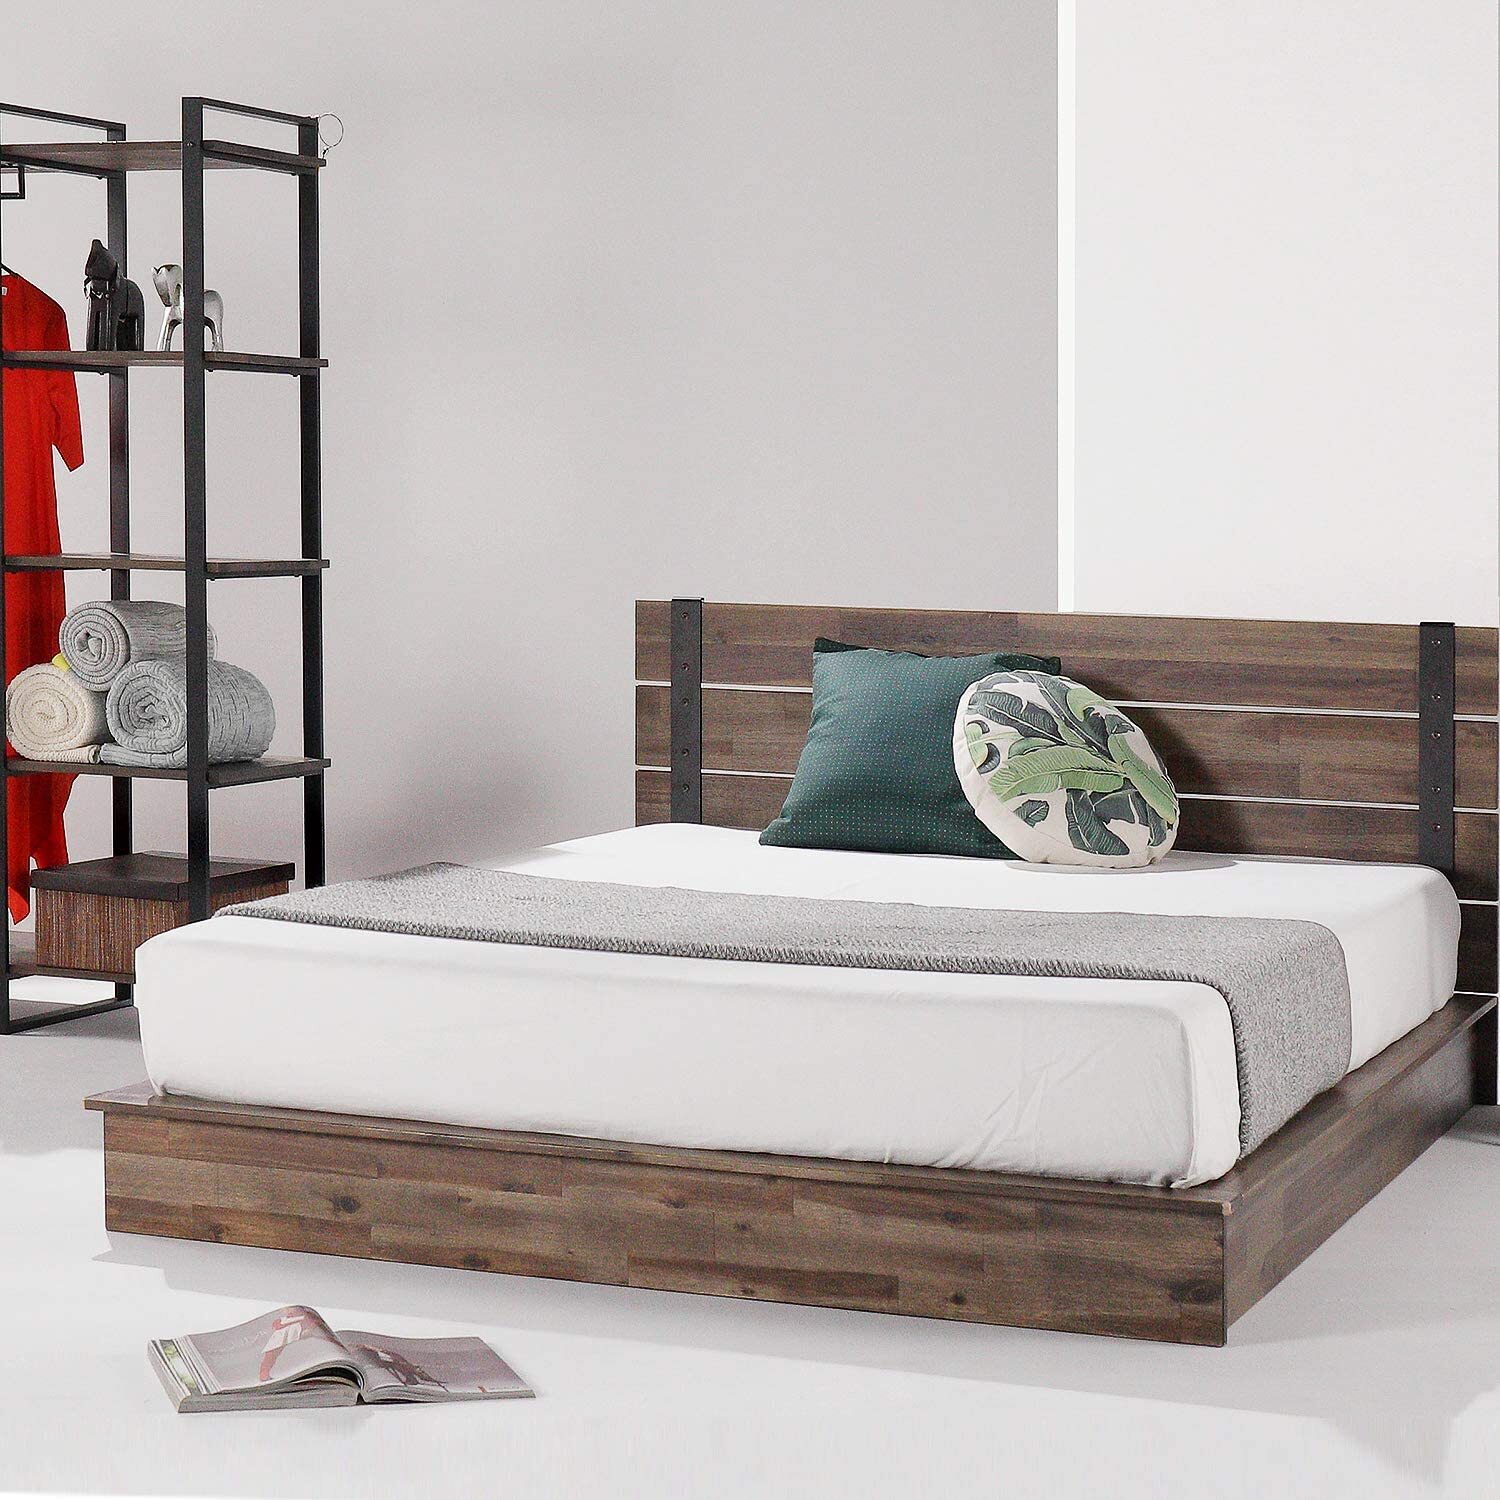 Modern Industrial Japanese Style Bed Frame